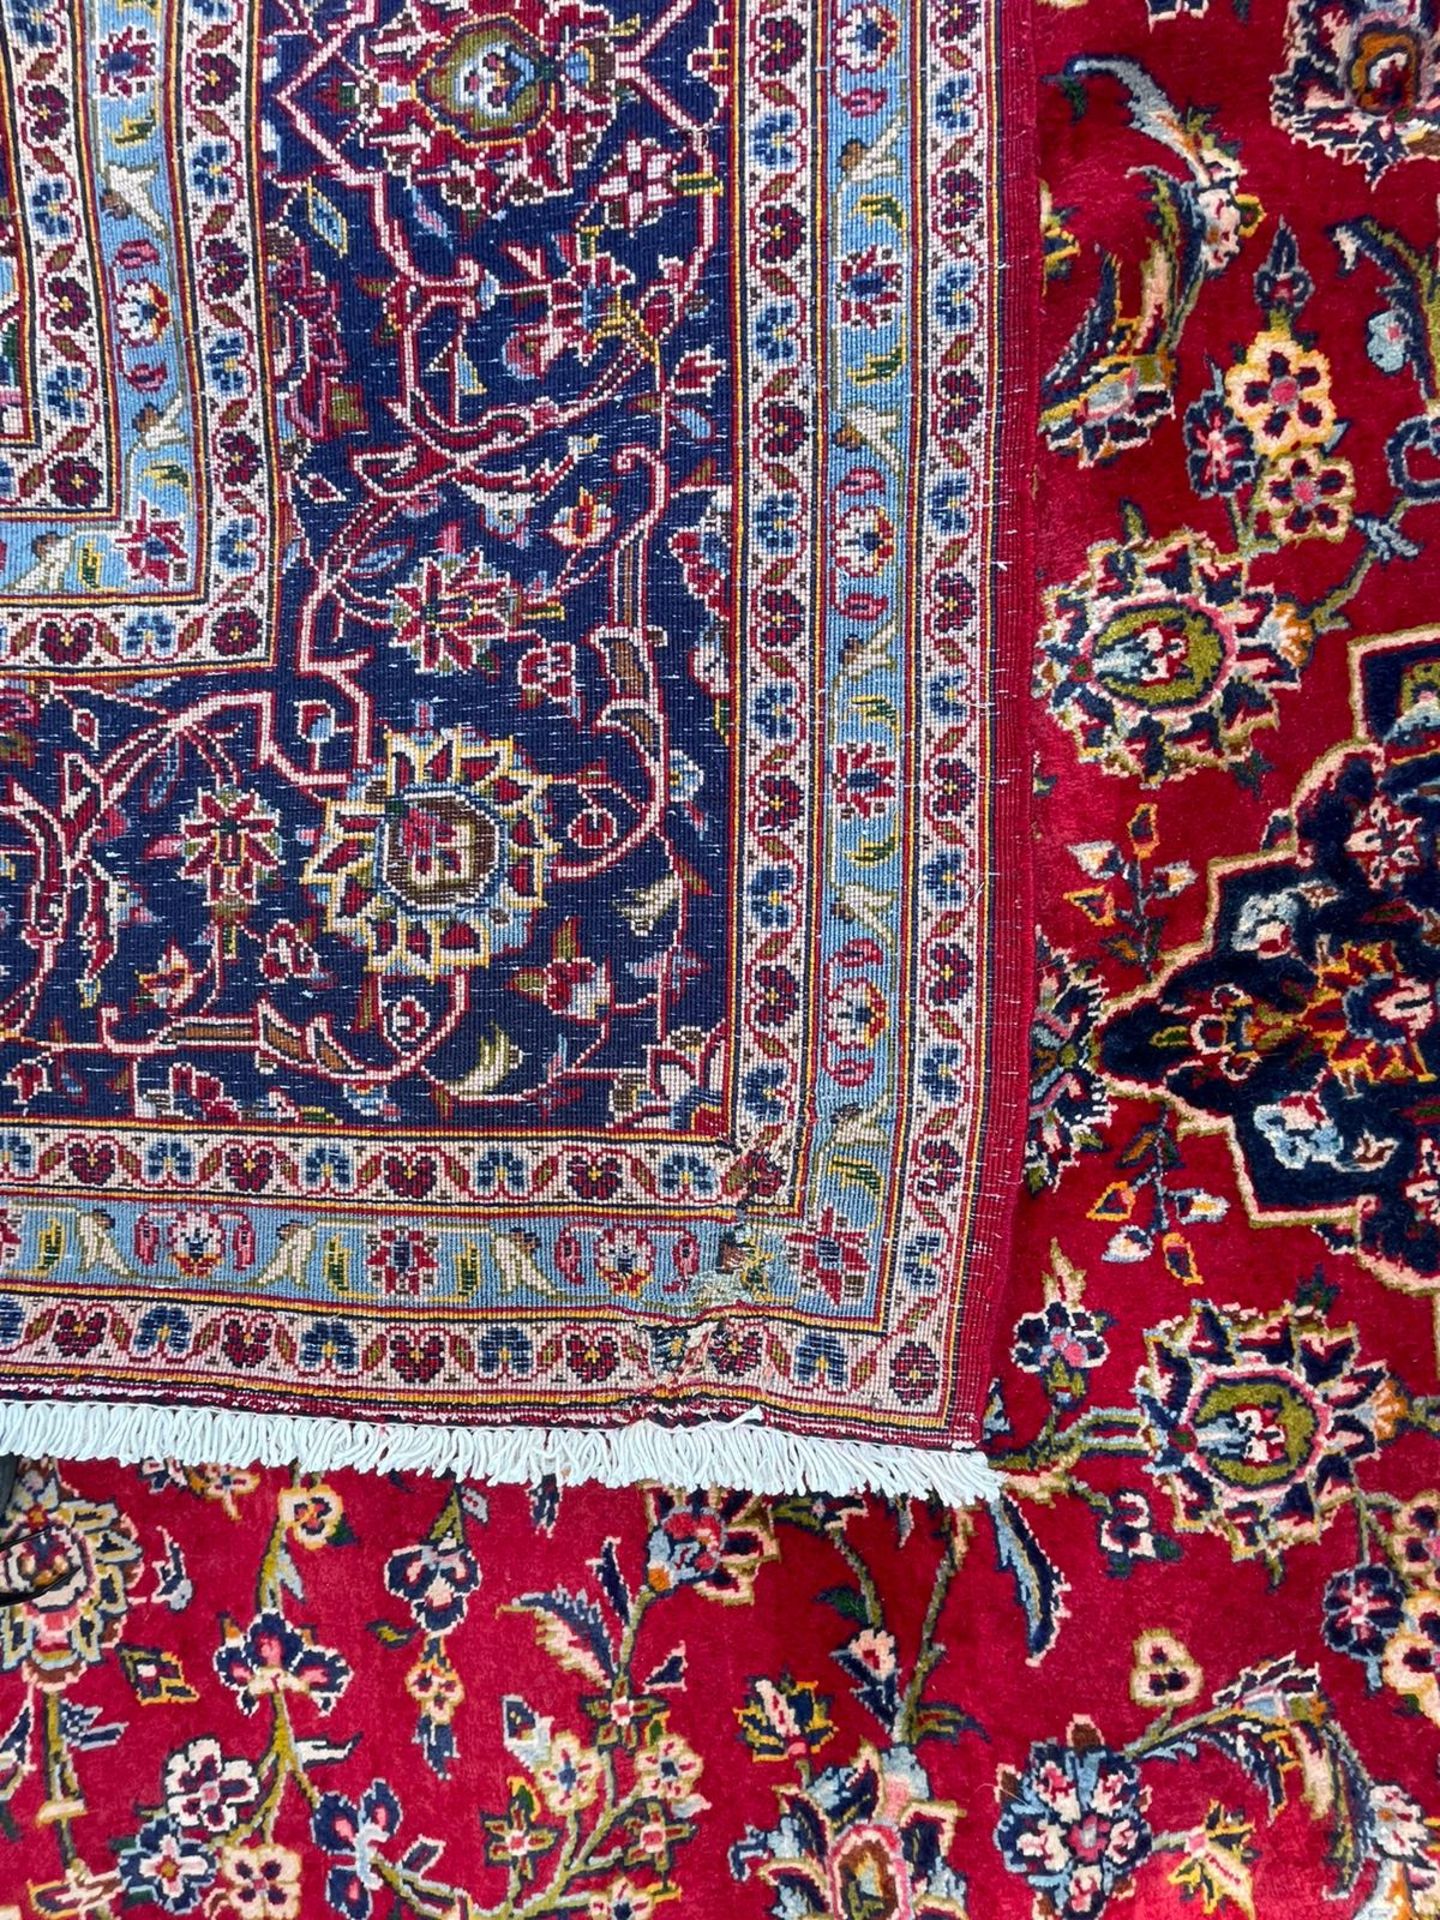 EARLY 20TH CENTURY CENTRAL PERSIAN KASHAN FLOOR CARPET RUG - Image 5 of 6